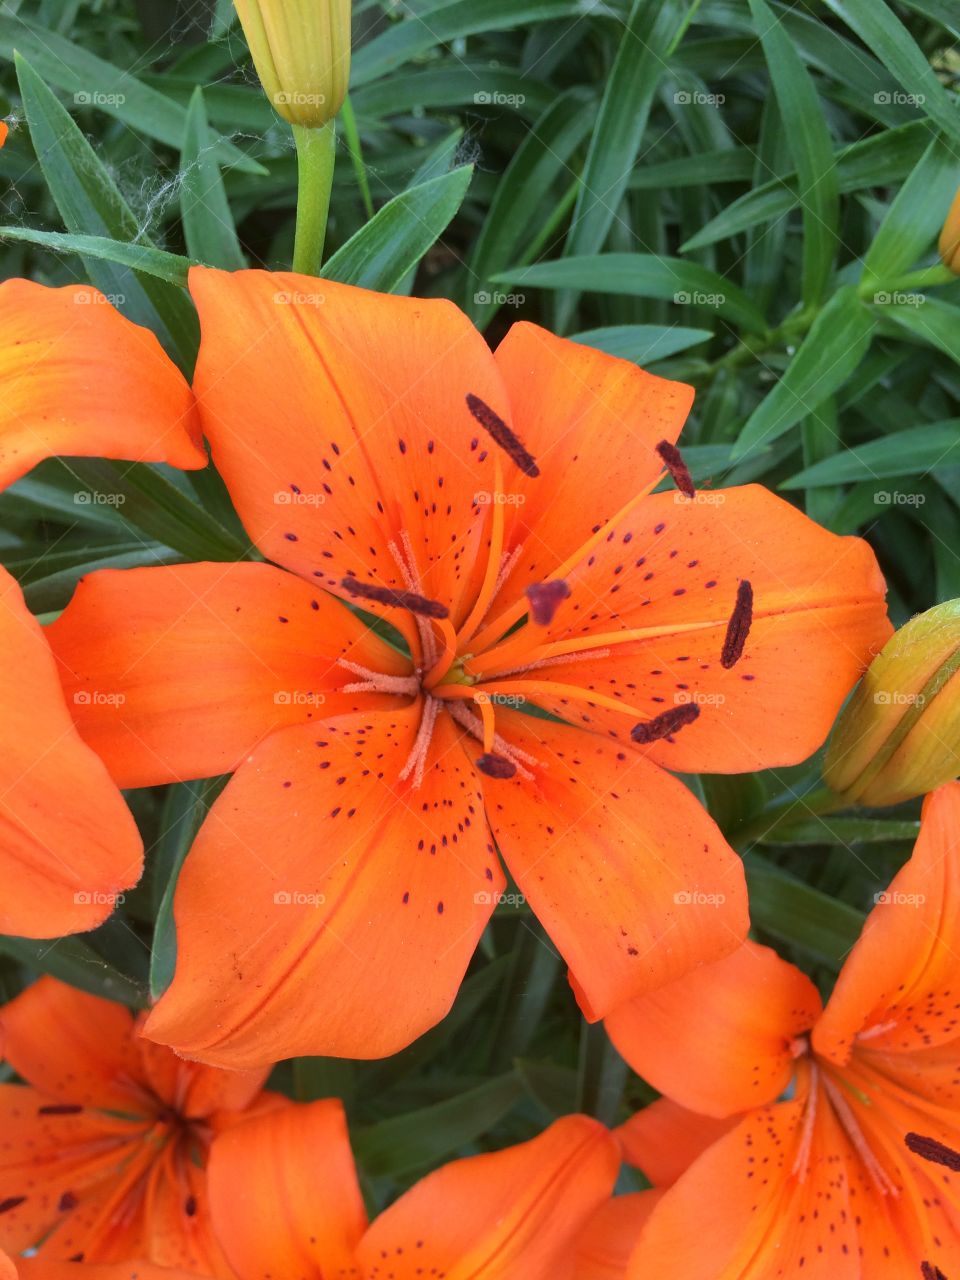 Tiger lily bloom in Ohio 2016